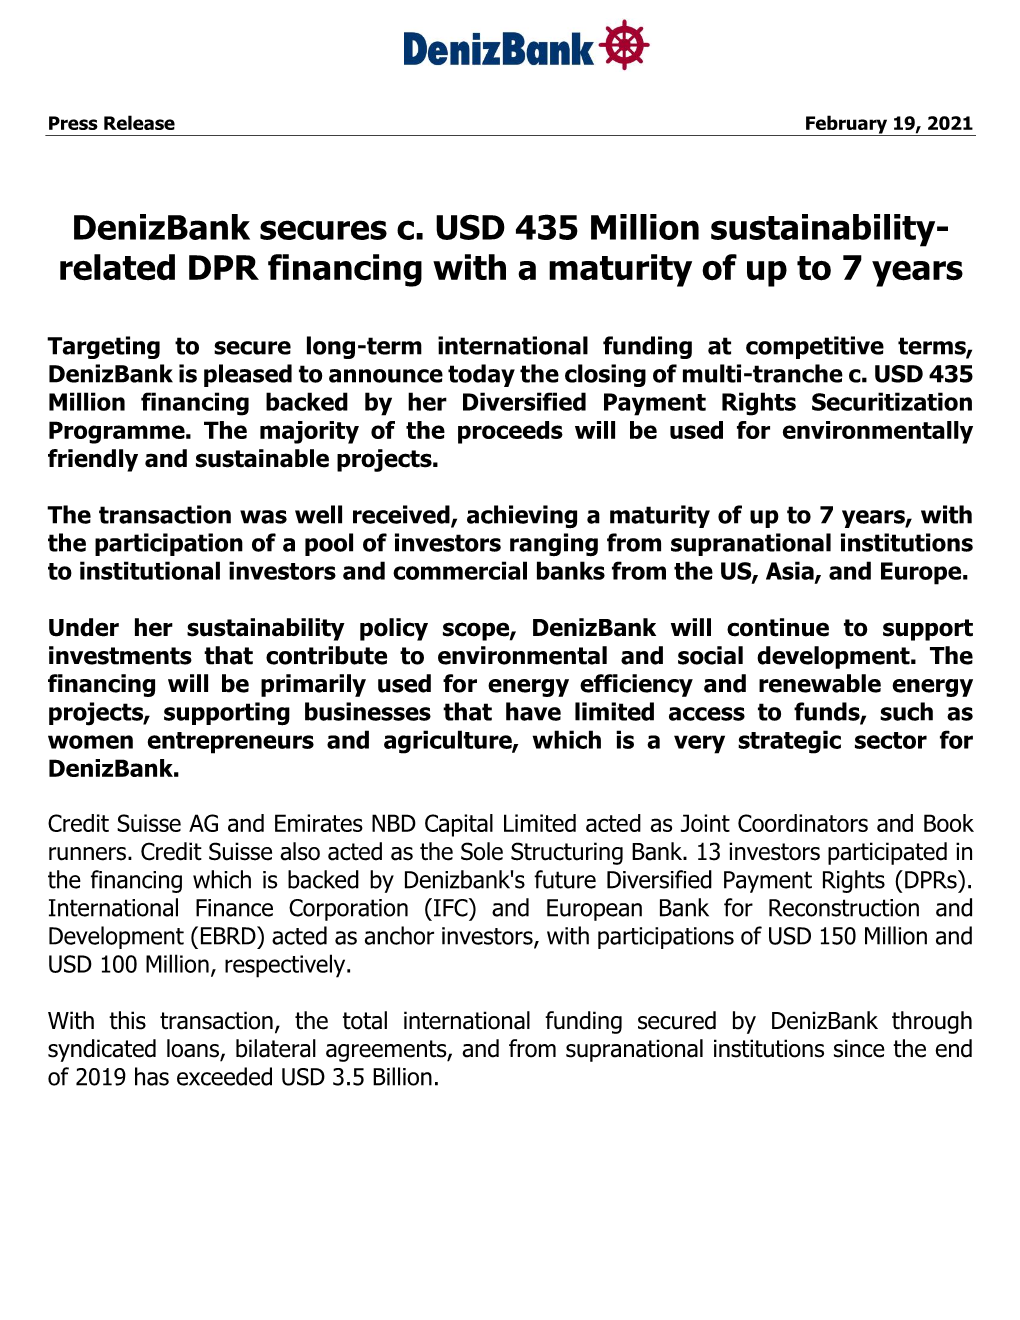 Denizbank Secures C. USD 435 Million Sustainability- Related DPR Financing with a Maturity of up to 7 Years